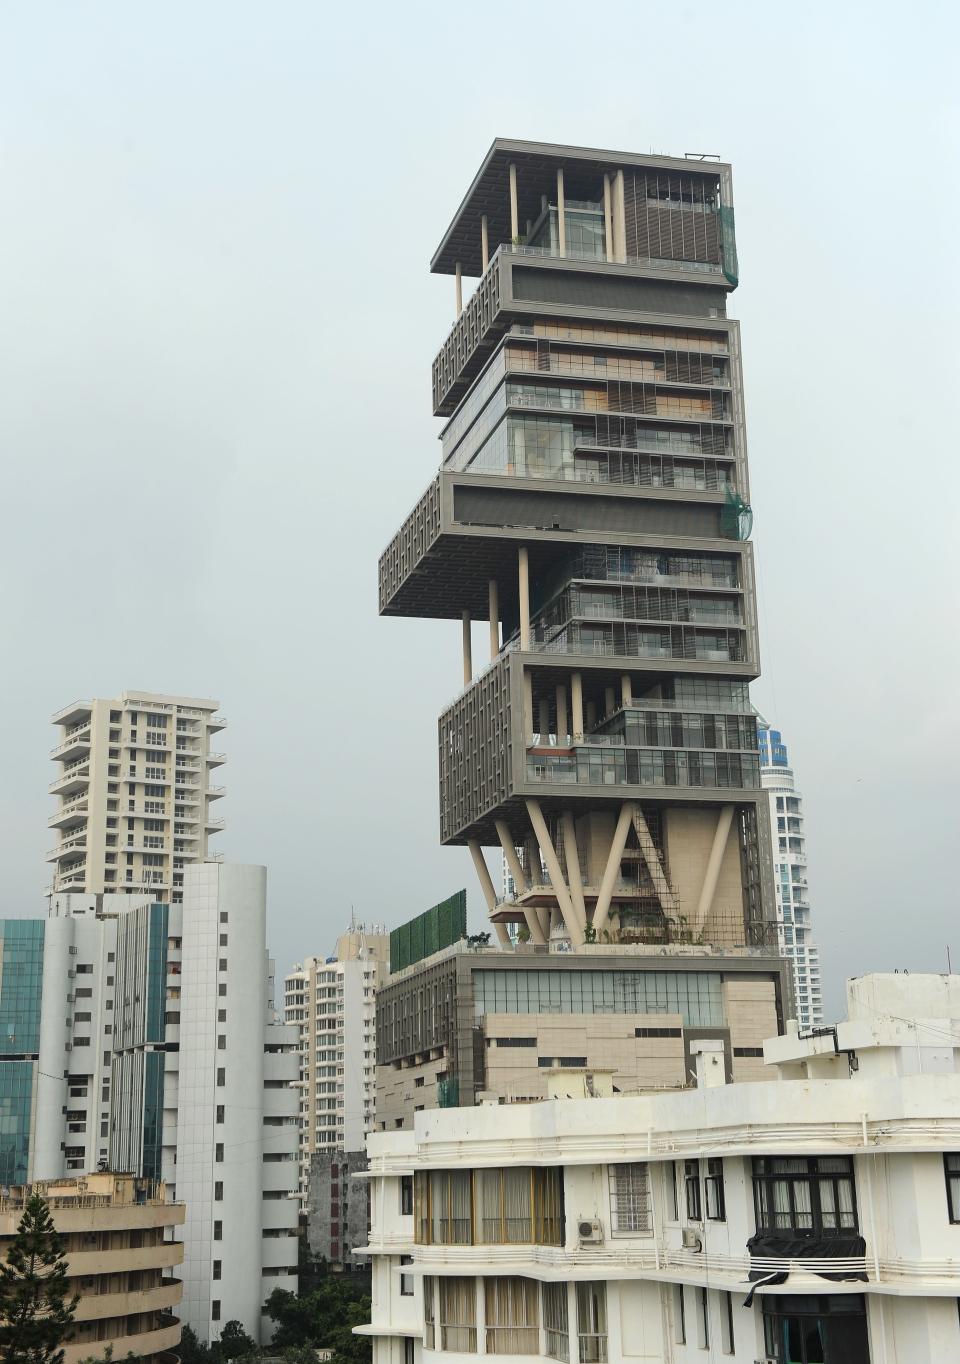 <p>At Rank 18, is perhaps the most-talked about buildings in recent times. <b>Antilia (pictured)</b> is the 27-floor personal home in South Mumbai belonging to businessman Mukesh Ambani, chairman of Reliance Industries. According to some media reports, a full-time staff of 600 maintains the residence, reportedly the most expensive home in the world. The building is named after the mythical Atlantic island of Antillia.</p> <p>The Antilia building is situated on an ocean-facing 4,532 square metres (48,780 sq ft) plot at Altamount Road, Cumballa Hill, South Mumbai.</p> (AFP PHOTO/Indranil MUKHERJEE)